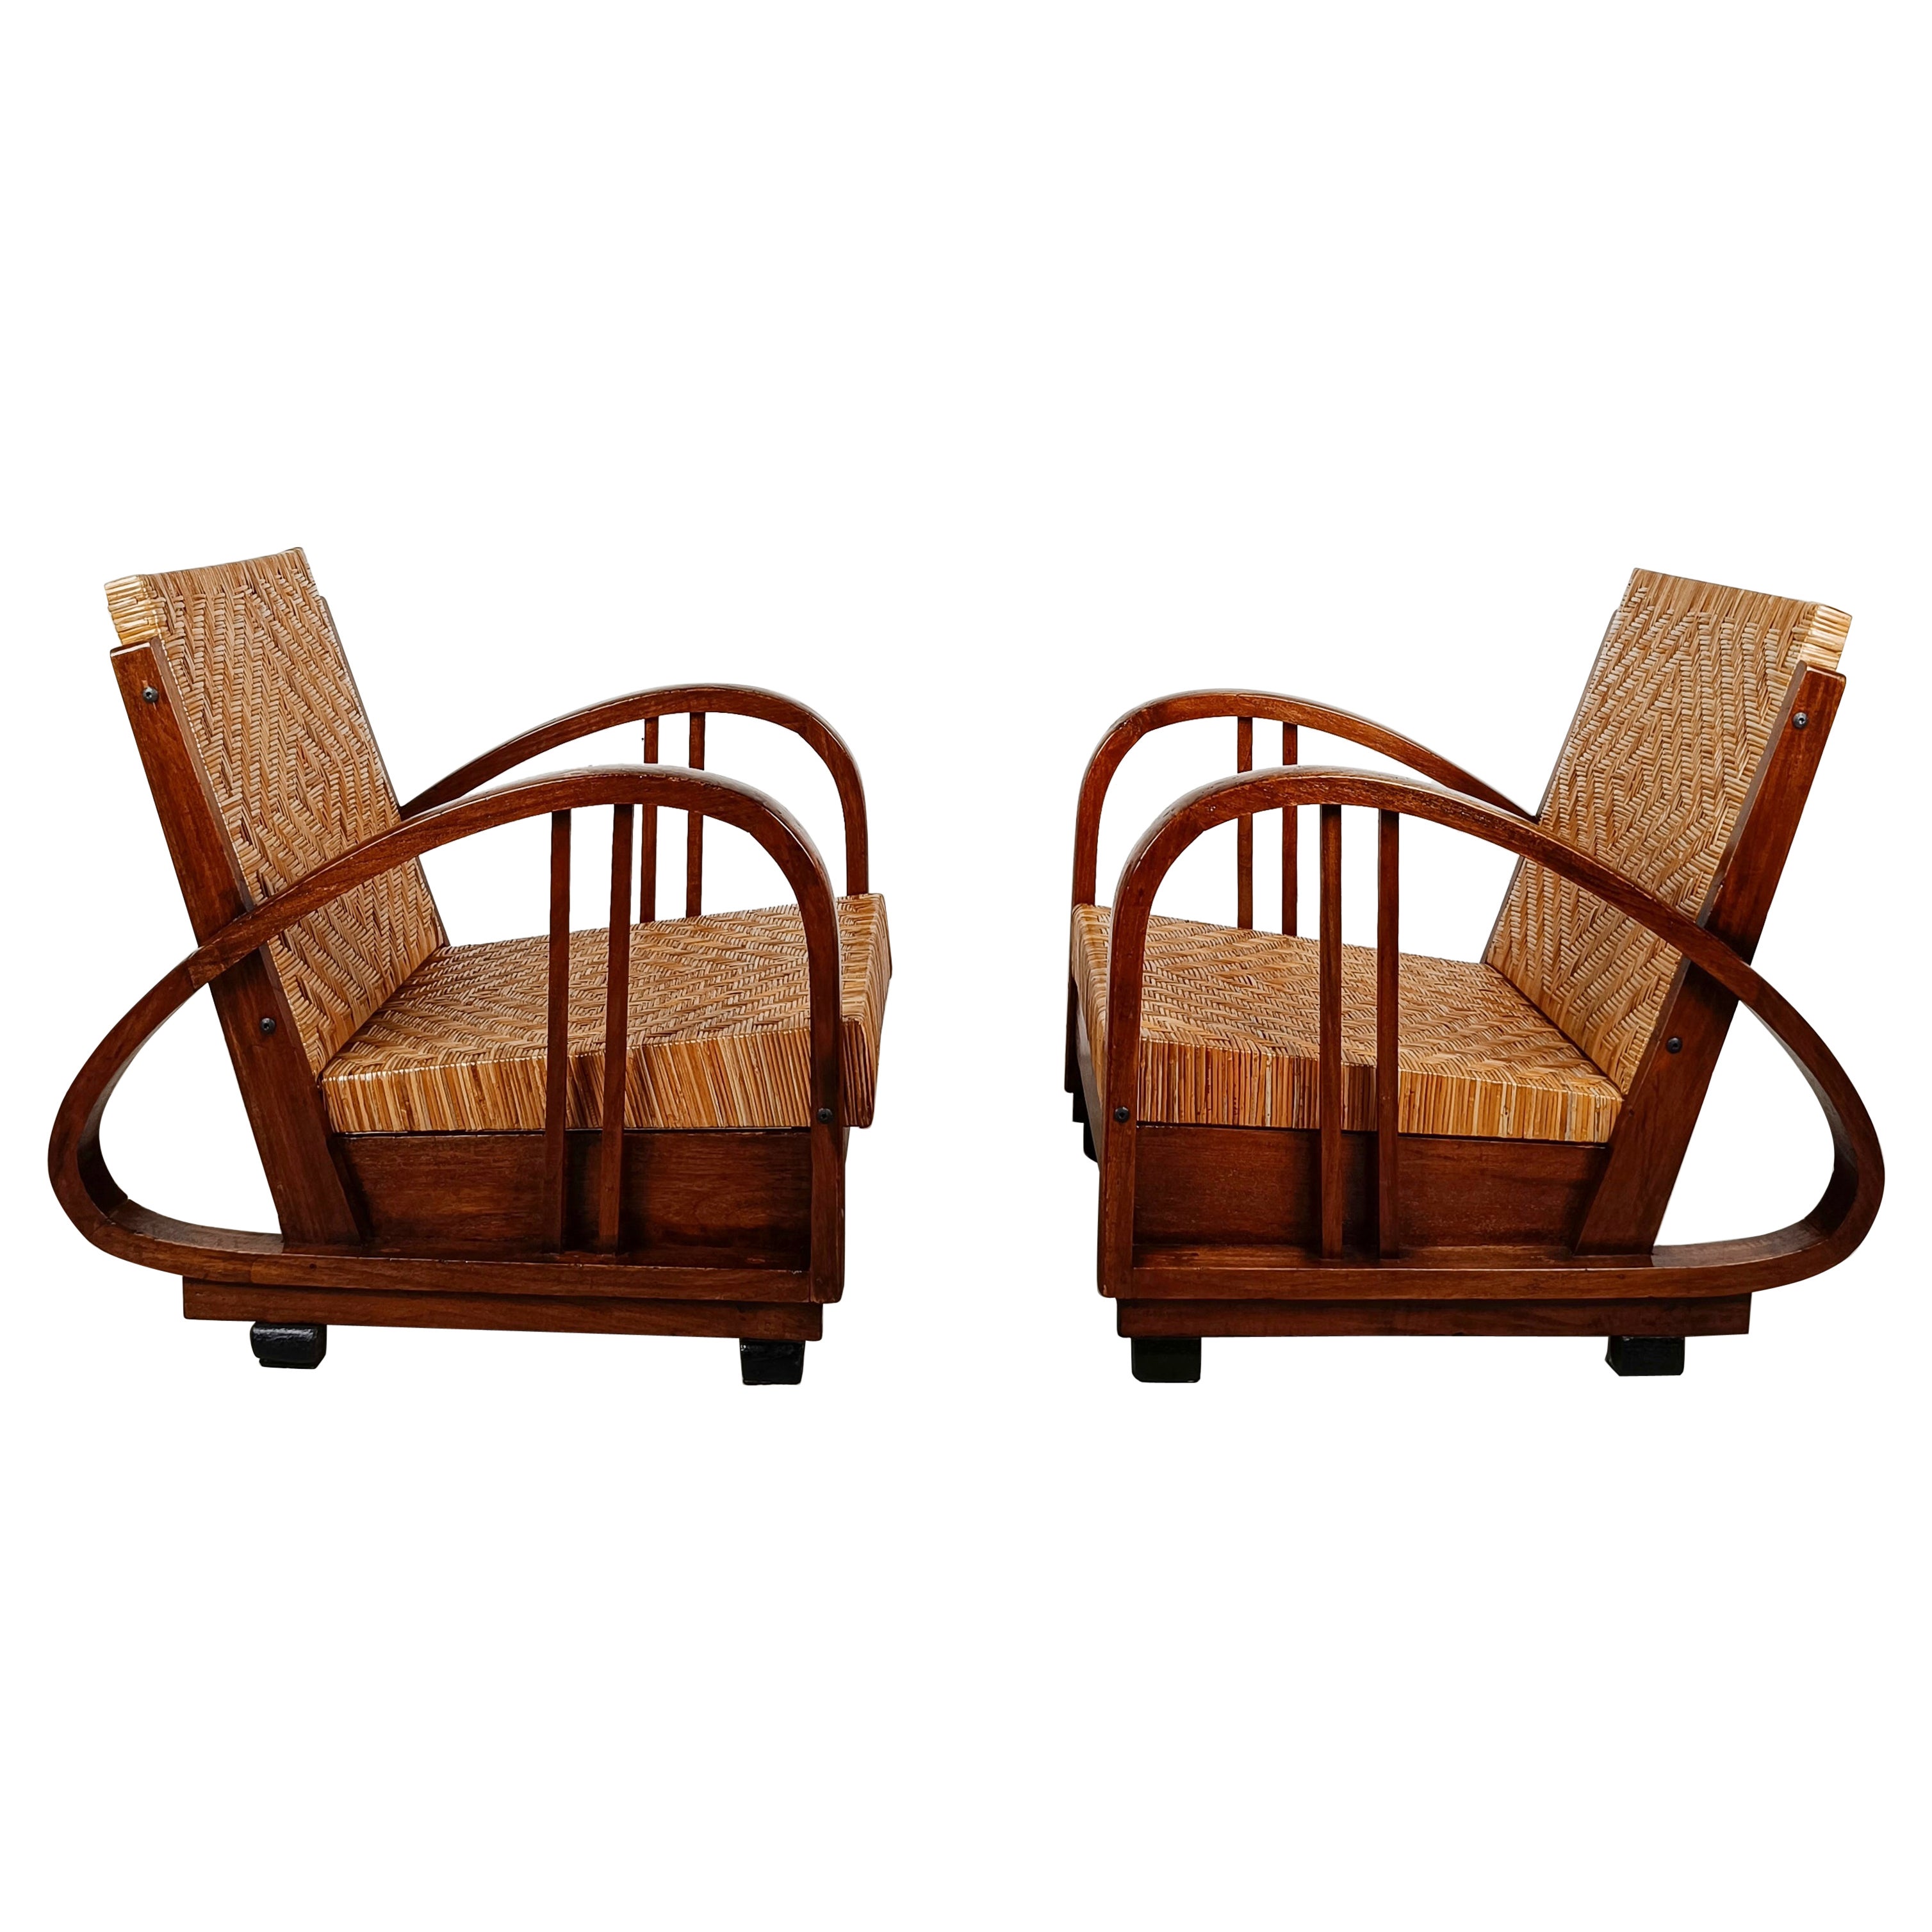 Pair of Art Deco Lounge Chairs in Teak and Cane in the Style of Francis Jourdain